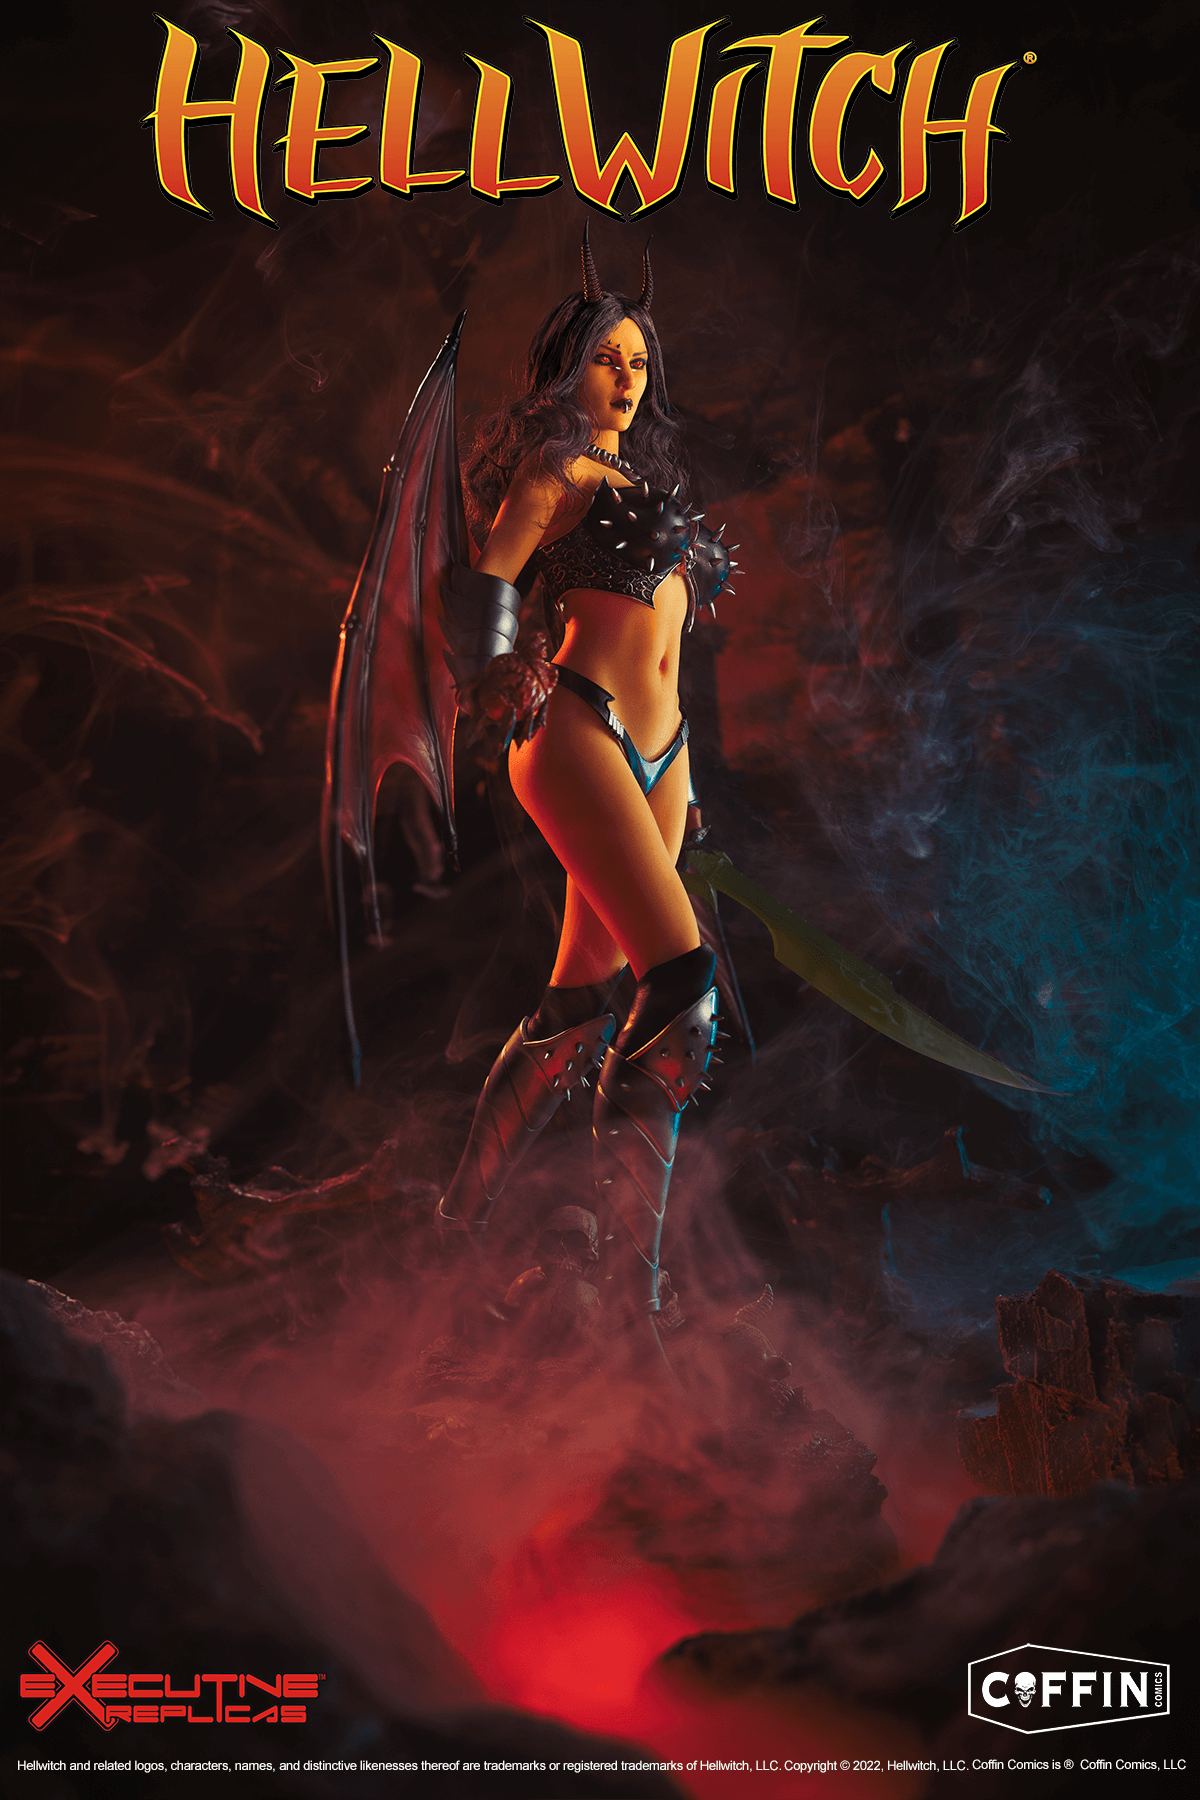 Hellwitch 1/6th scale action figure